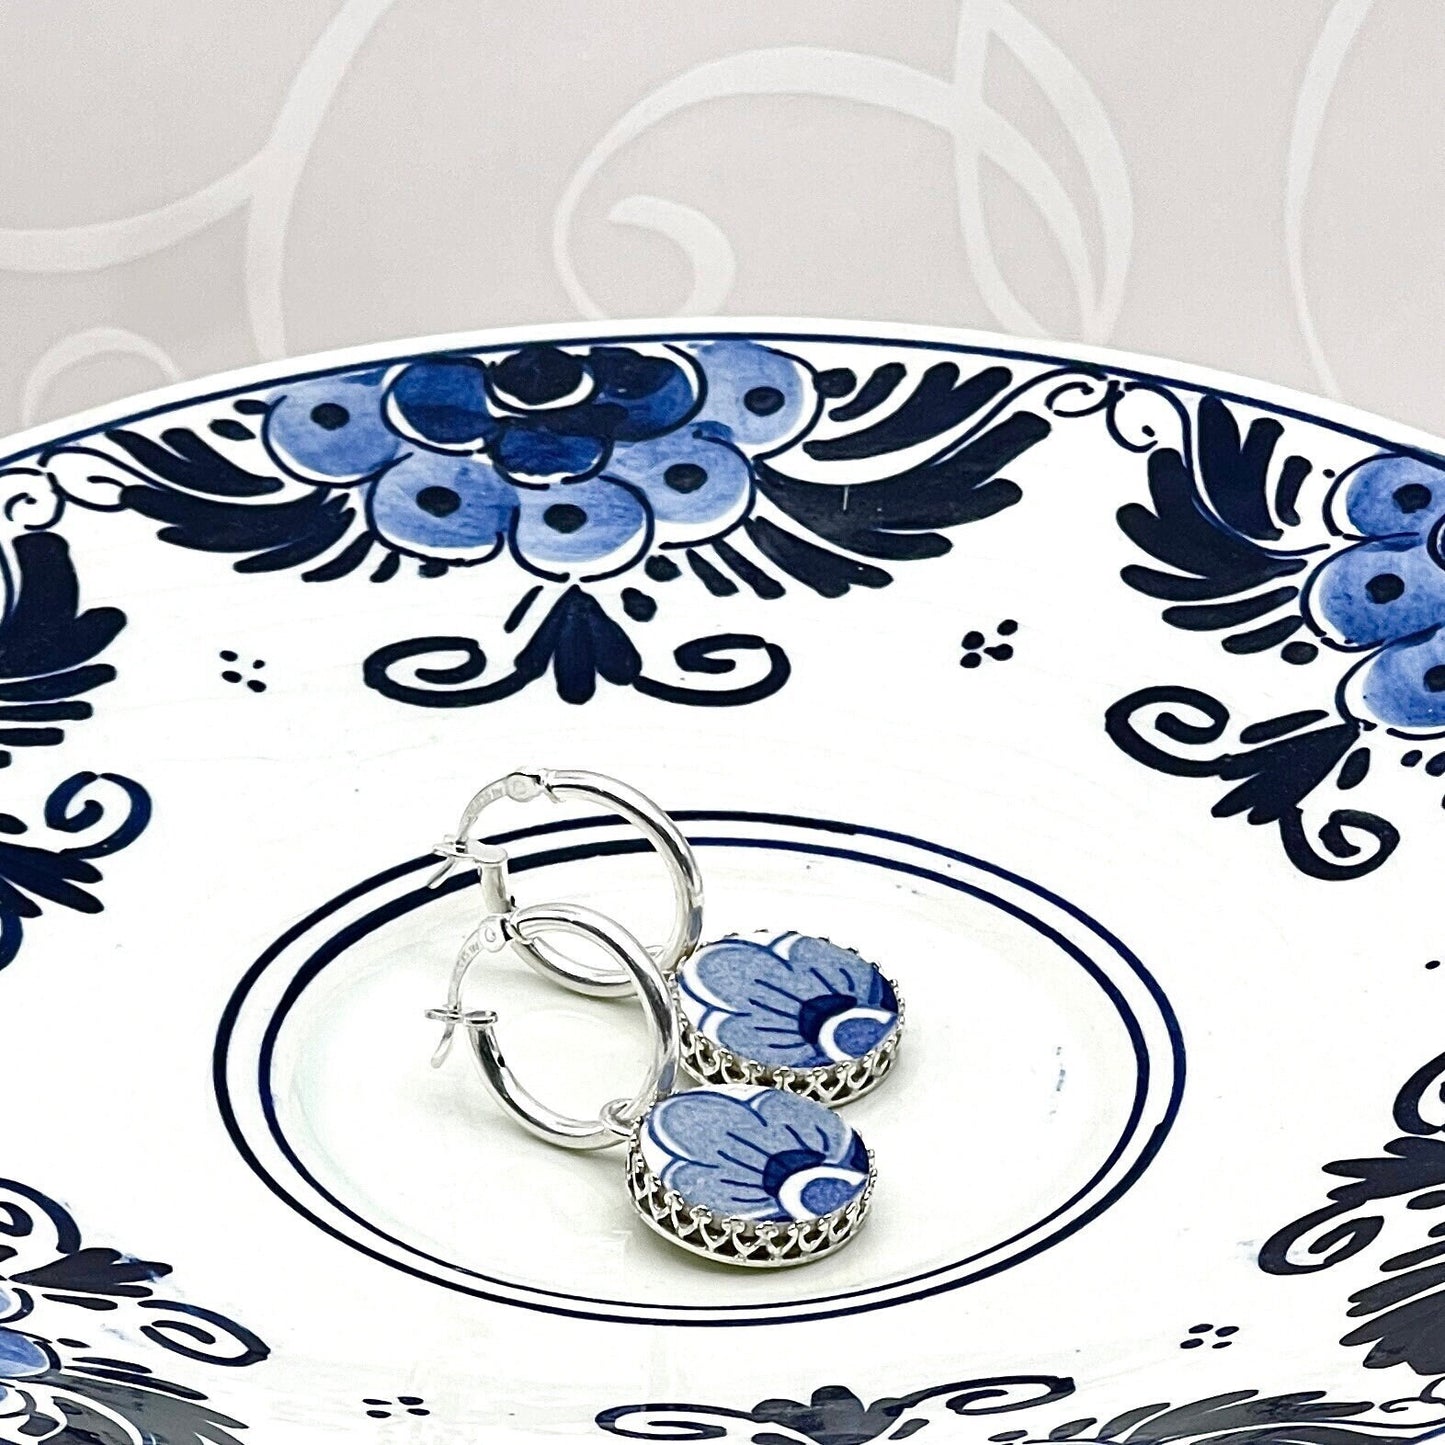 Dainty Porcelain Hoop Earrings, Unique 18th and 20th Anniversary, Gift for Wife, Blue Floral Broken China Jewelry Gifts for Women